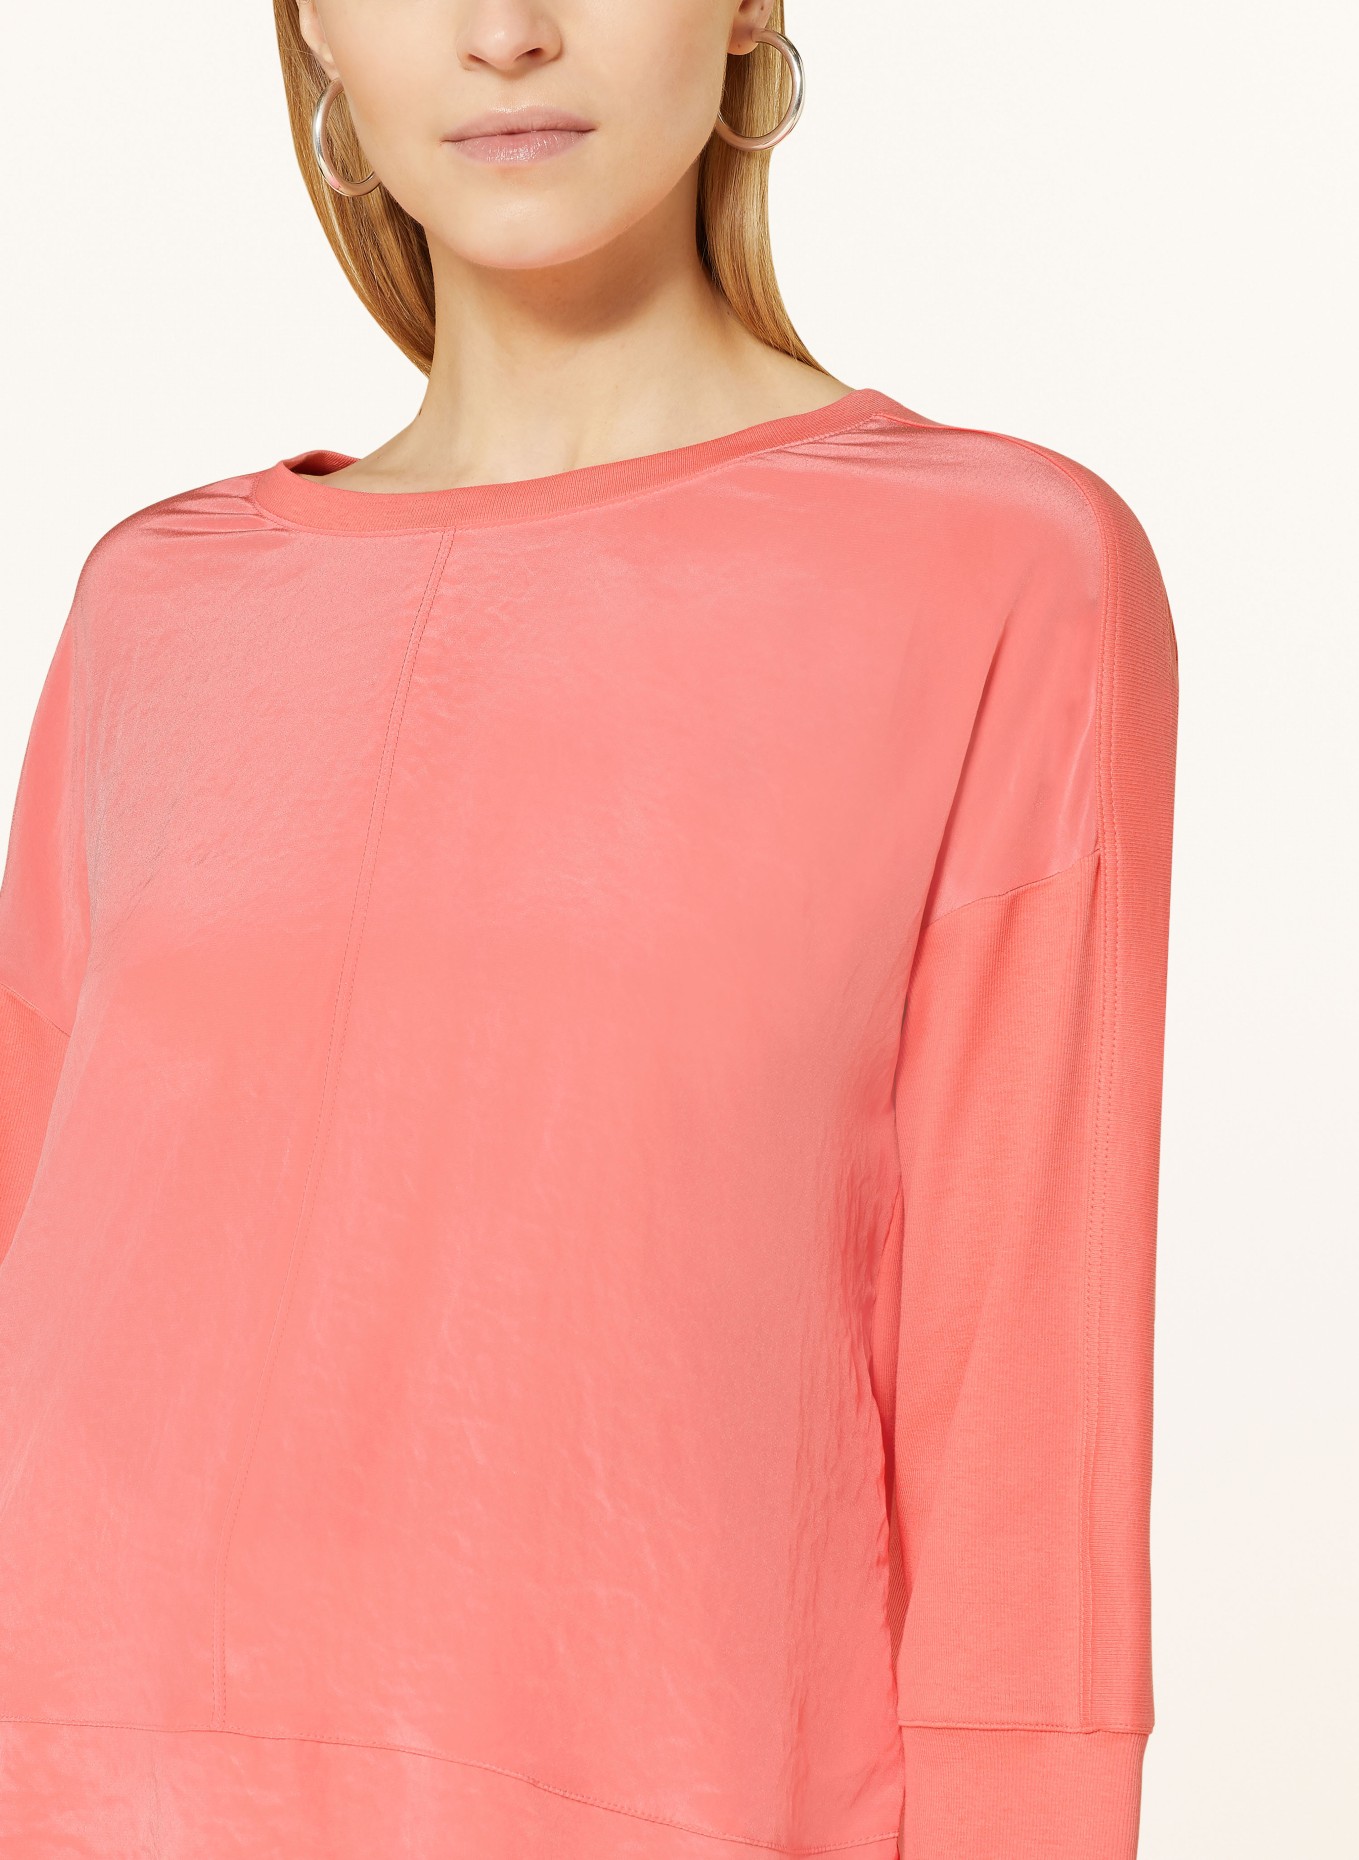 MARC CAIN Shirt blouse in mixed materials with 3/4 sleeves, Color: 238 light neon red (Image 4)